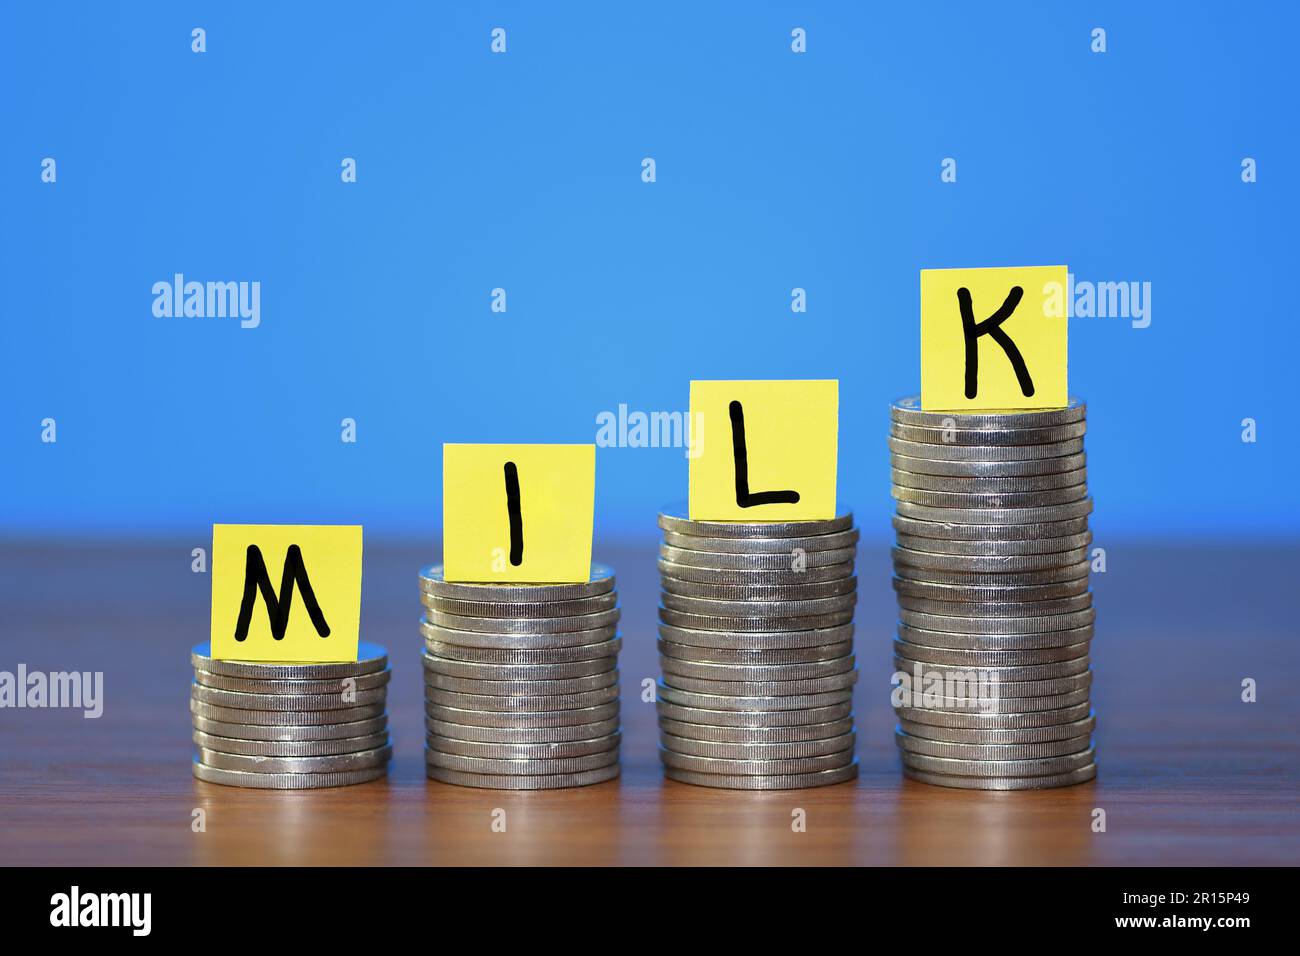 A row of a growing stack of coins illustrating the increasing cost of Milk due to the rising cost of living, on a blue background with copy space Stock Photo